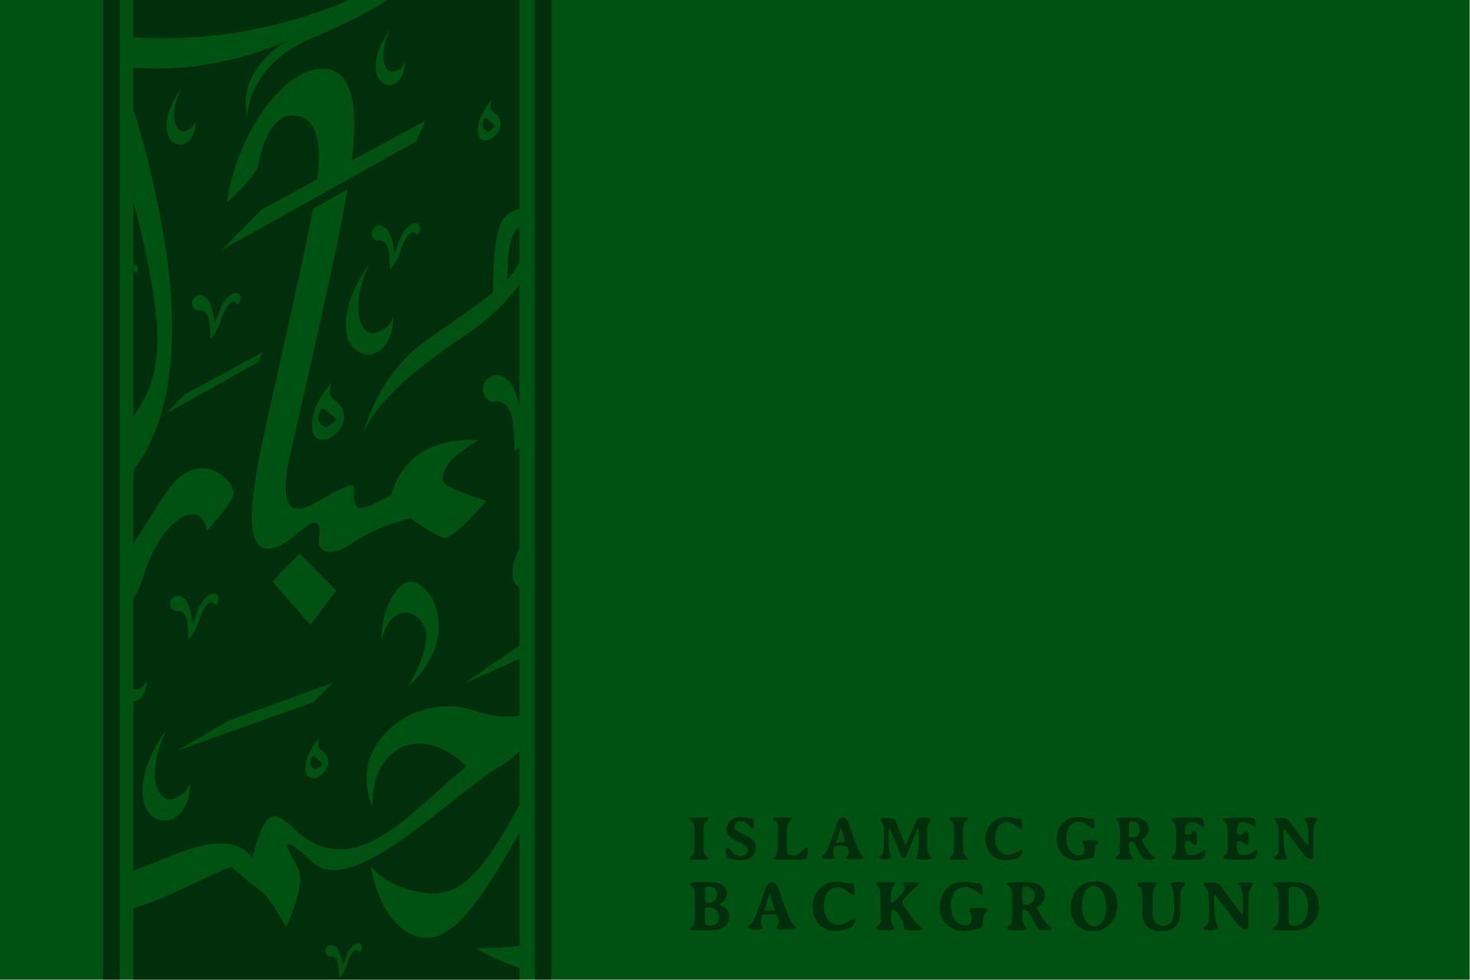 Islamic Green Background With Arabic Calligraphy Mubarak Warahmah Translated Blessed and mercy - Vector Design